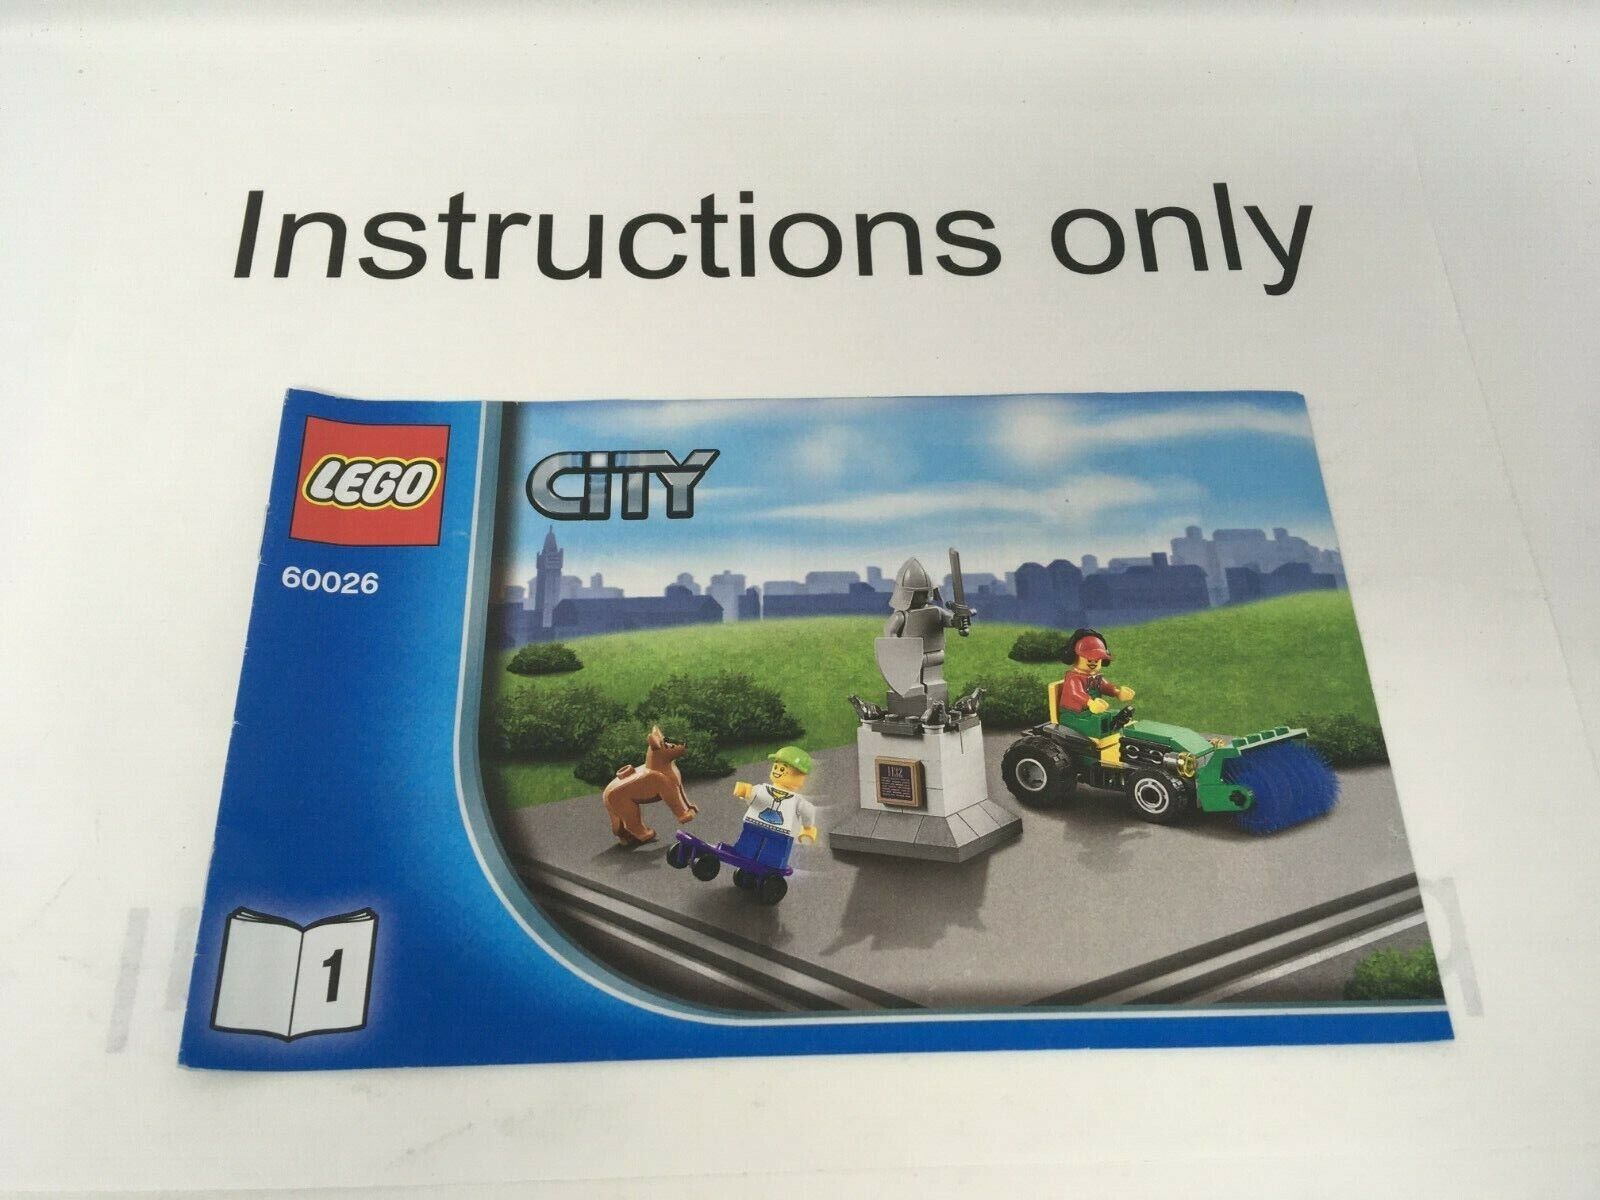 ::ONLY instructions Books 1-5 Lego 60026 Town Square City traffic; no bricks/parts